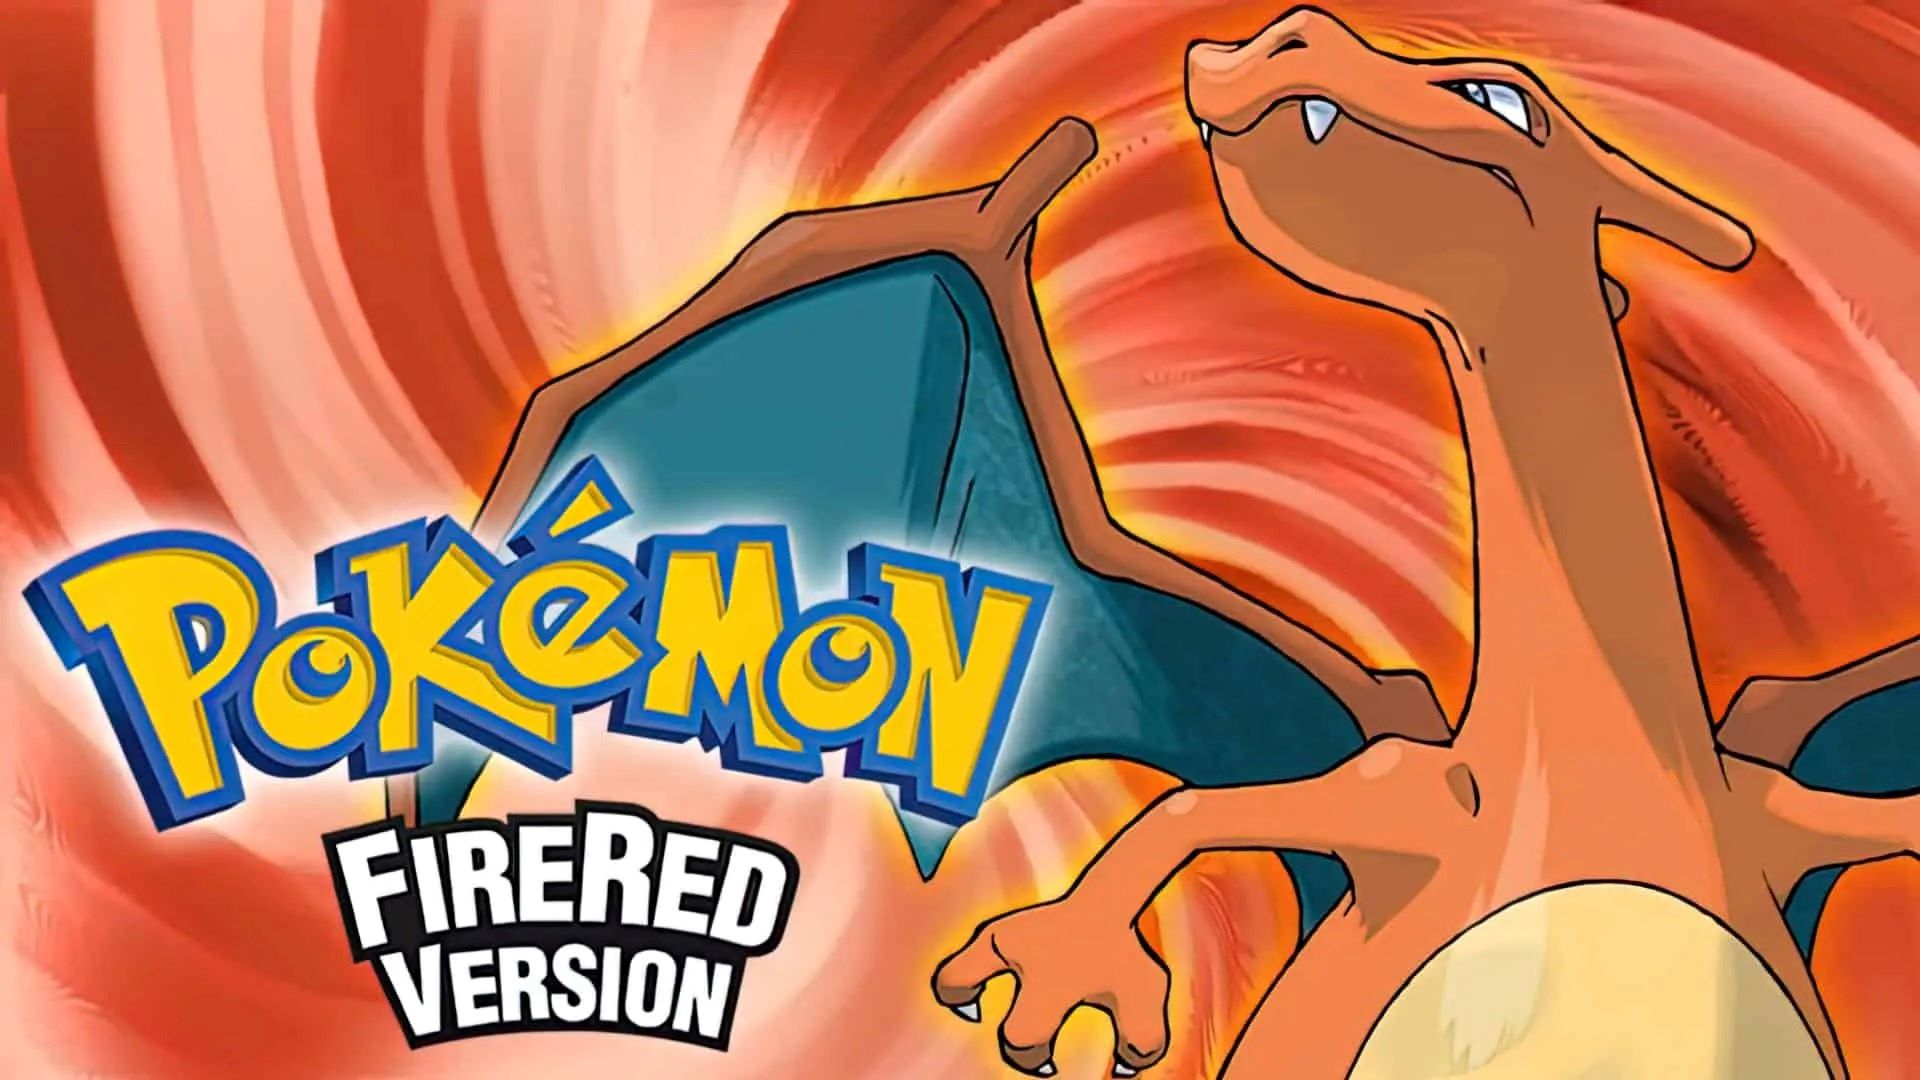 The Ultimate Fire Red Pokémon Dream Team Revealed - Unleash Their Power!